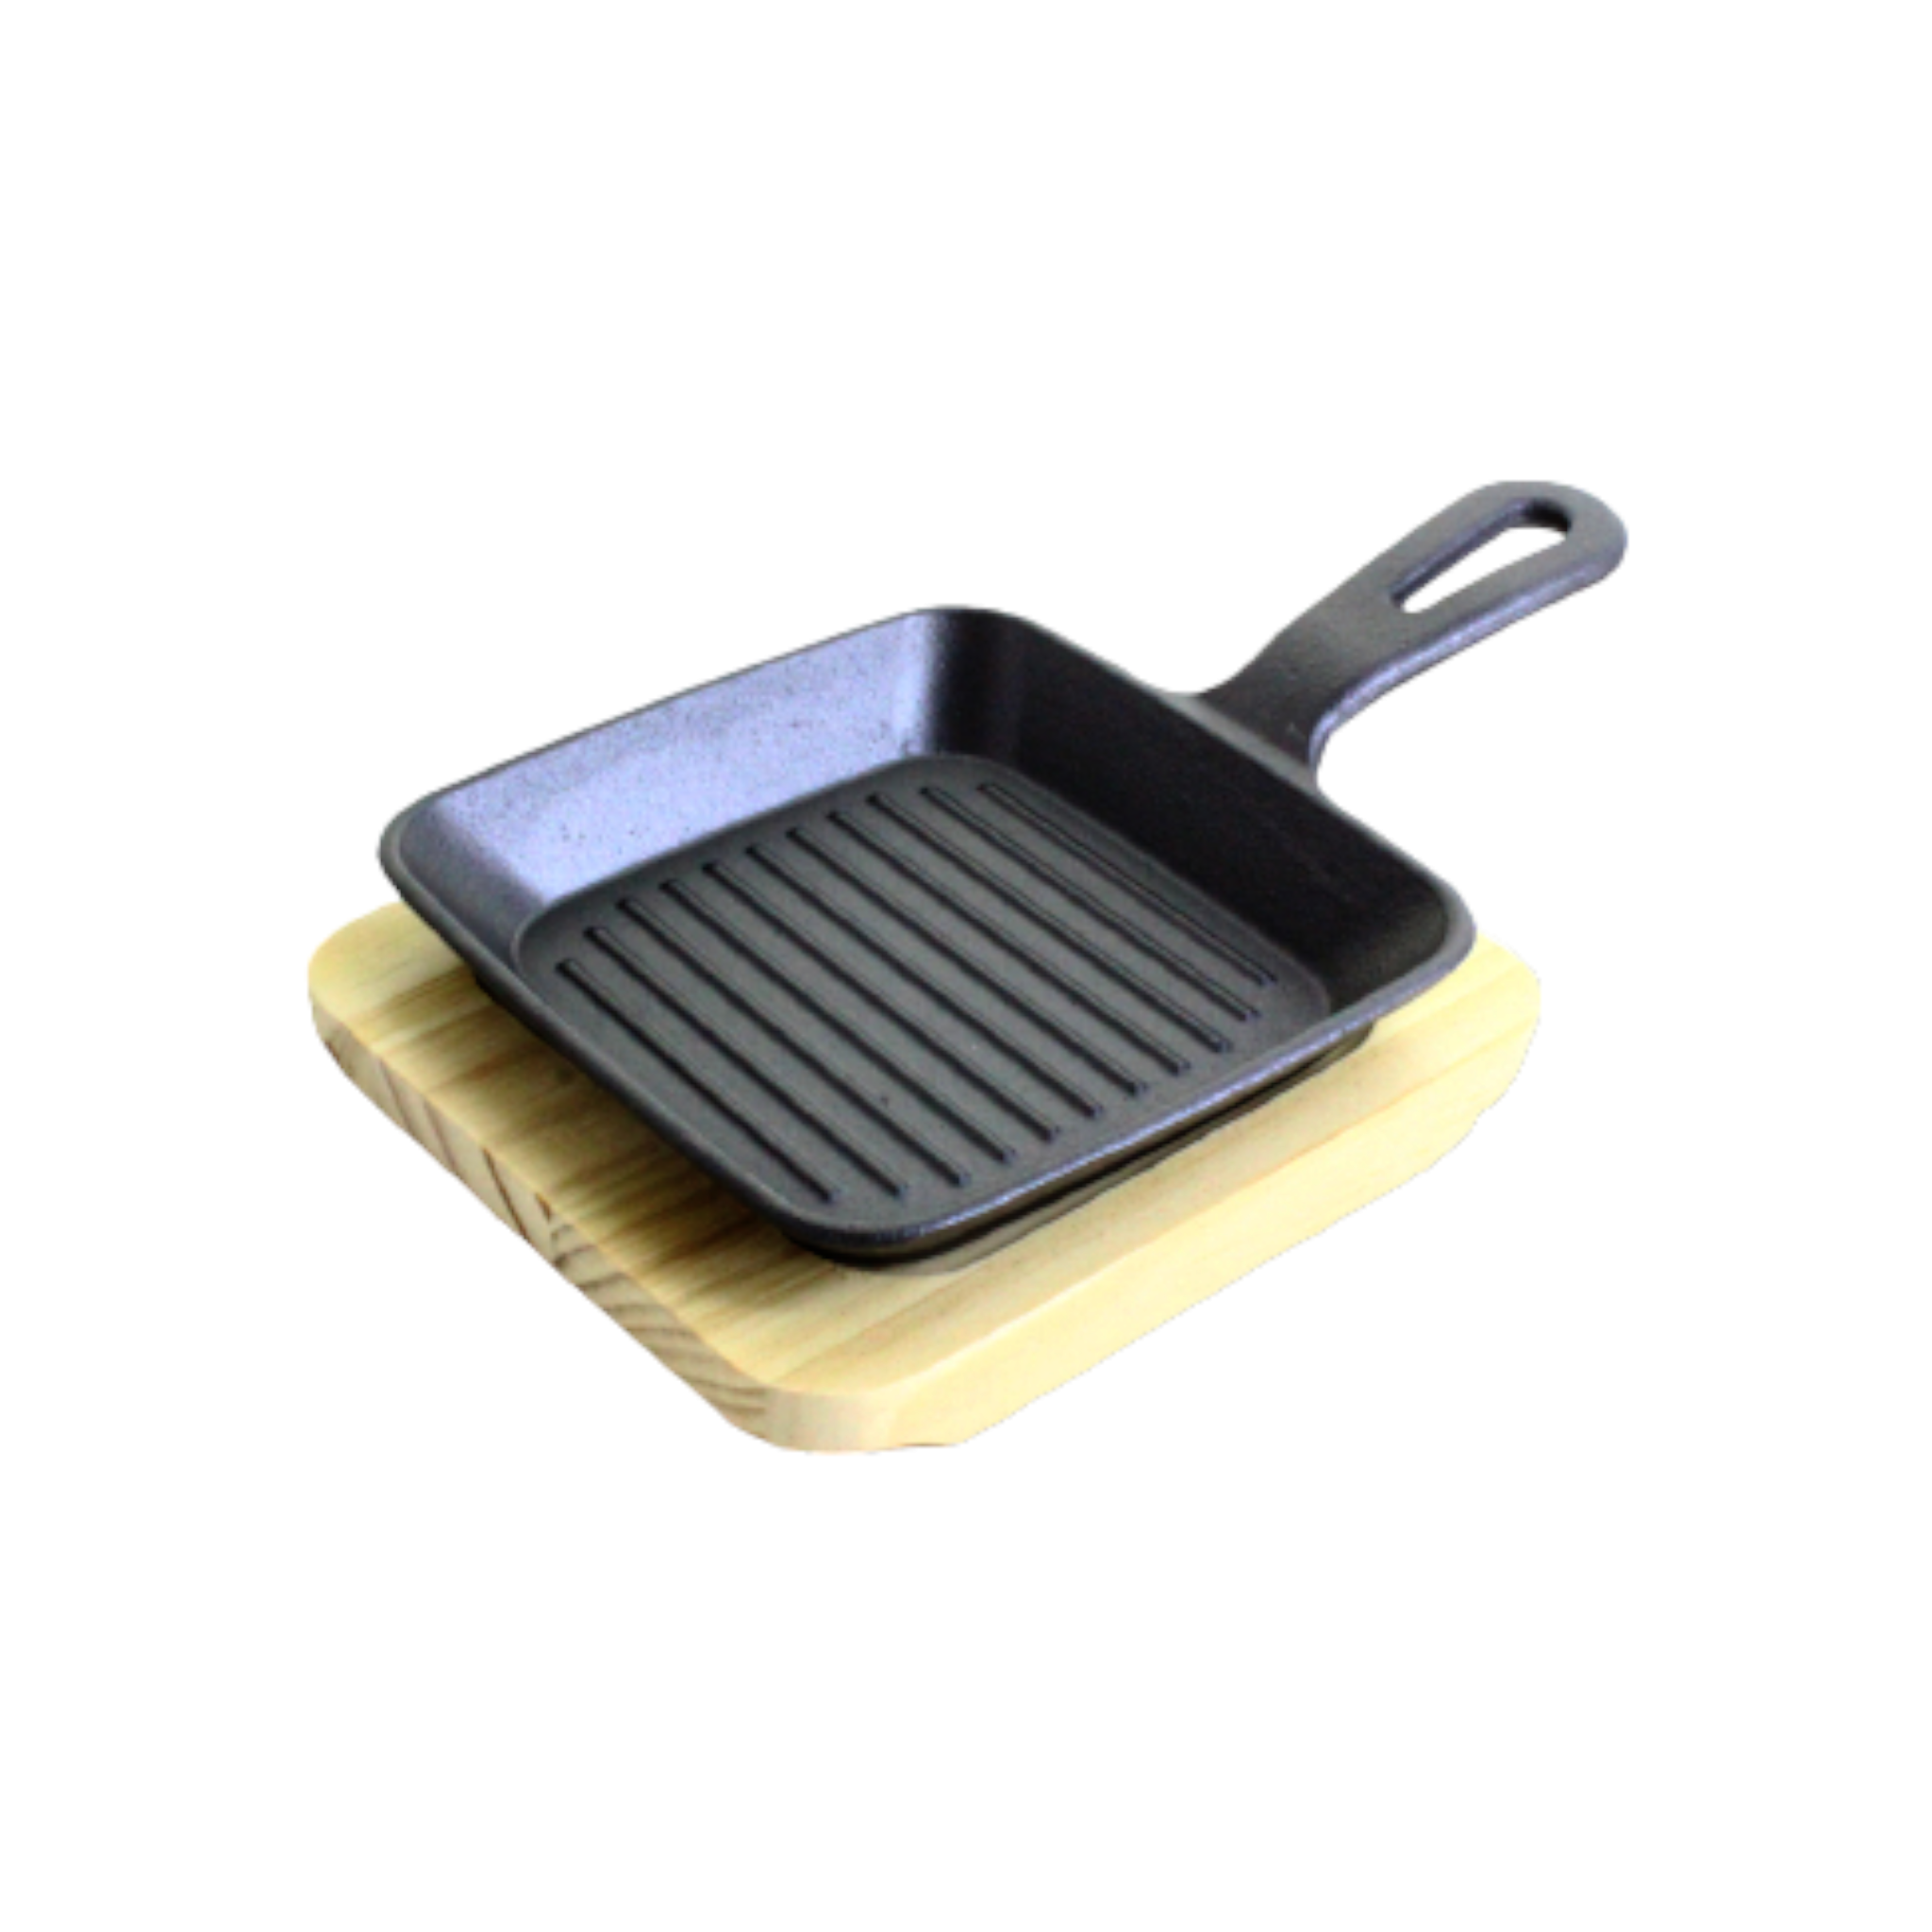 Cast Iron Square Skillet Sizzler Pan Rectangular Wave Platter Grill Fryer with Wooden Board XK1015